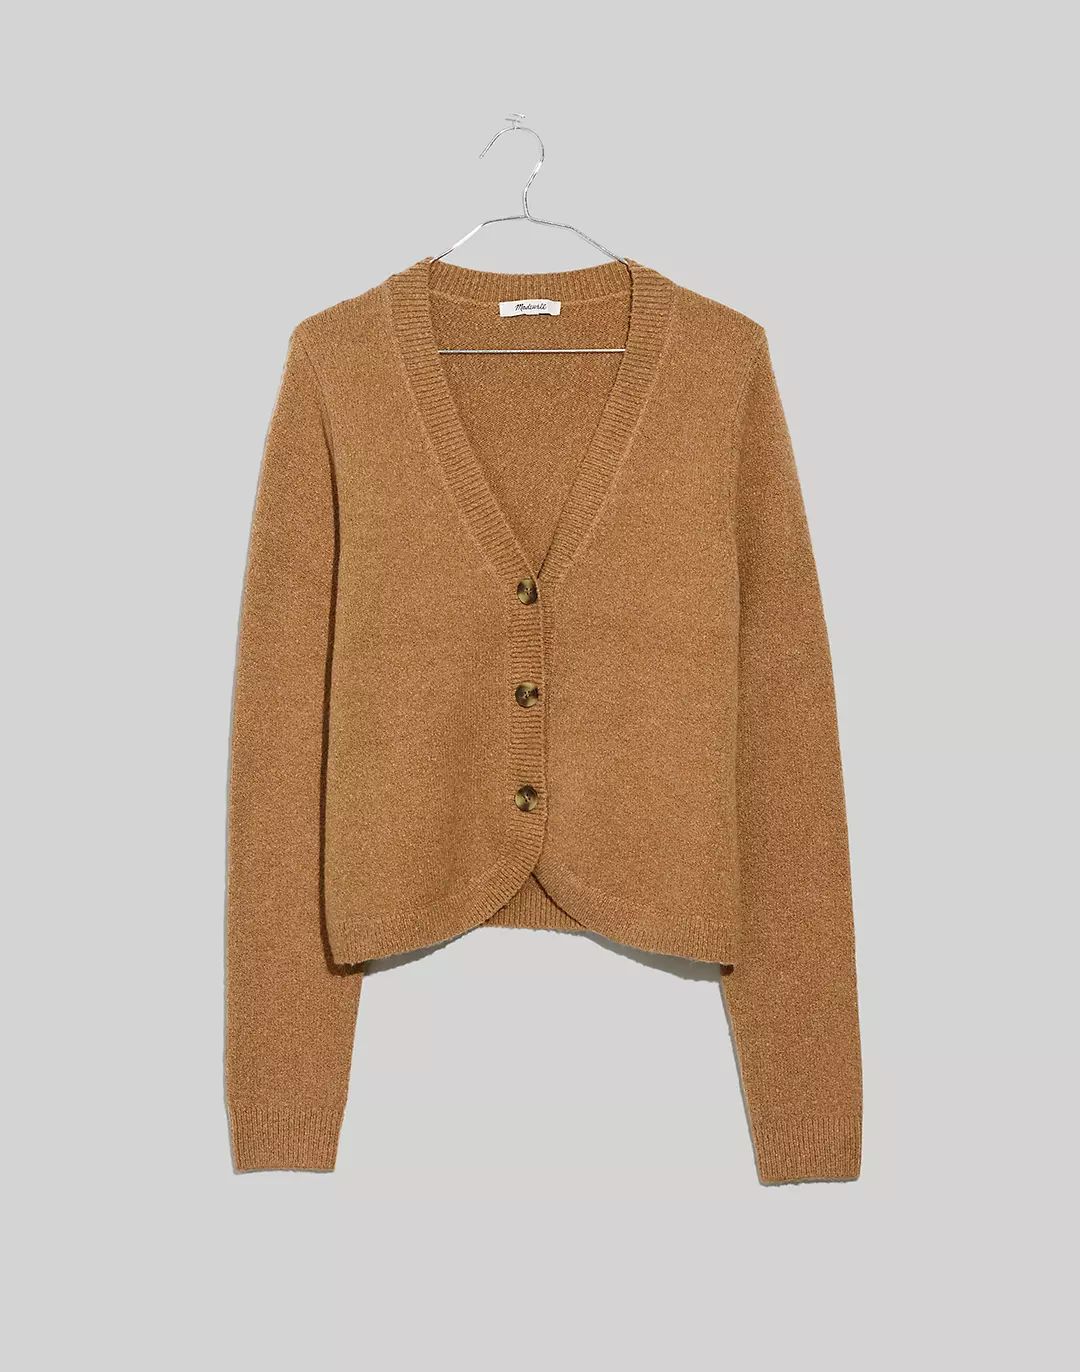 Haskell Crop Cardigan Sweater in Coziest Textured Yarn | Madewell